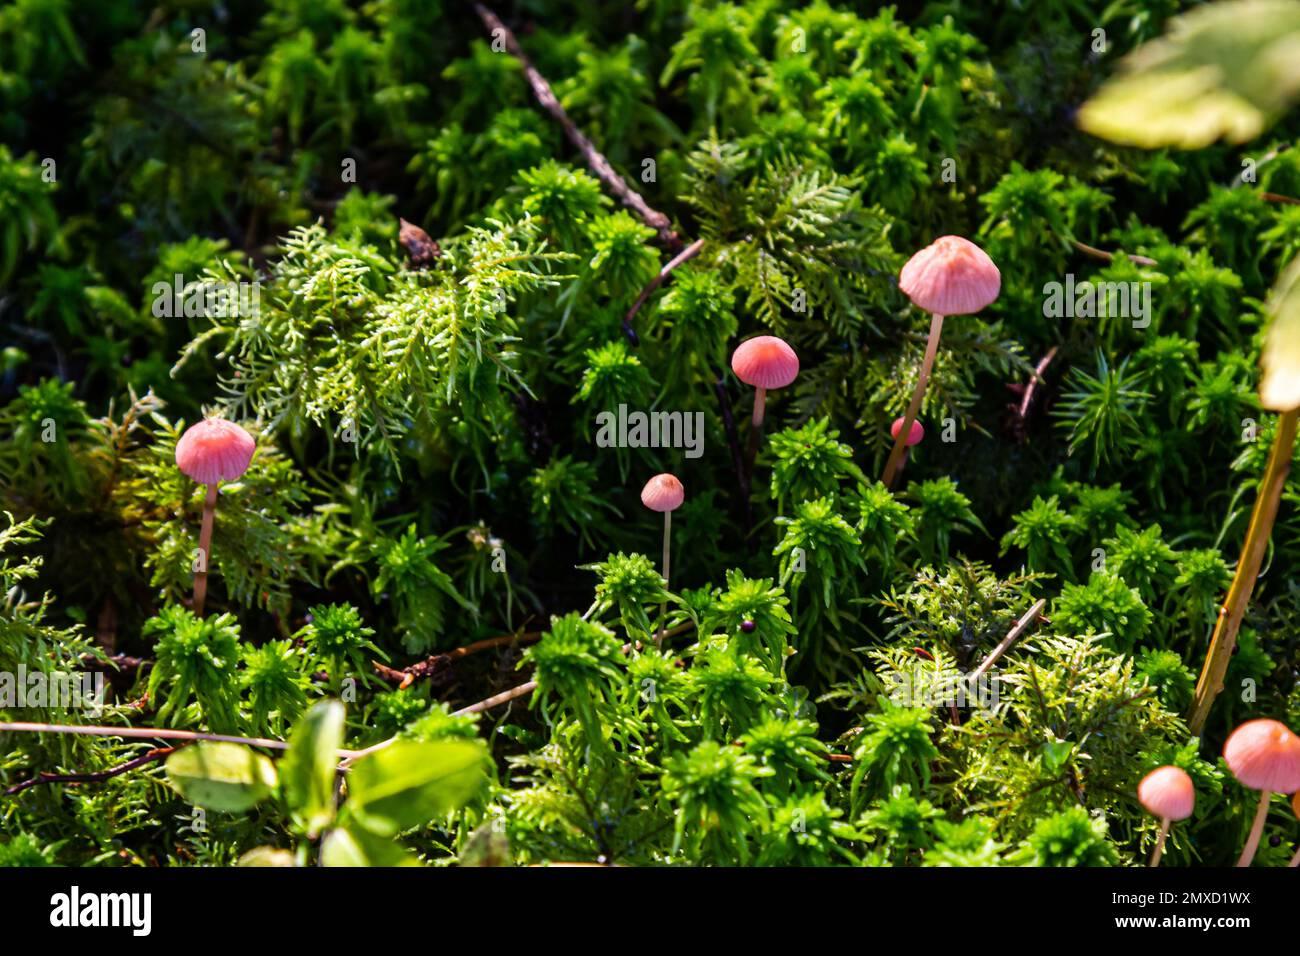 inedible-mushroom-mycena-rosella-in-the-spruce-forest-known-as-pink-bonnet-wild-mushrooms-growing-in-the-moss-2MXD1WX.jpg